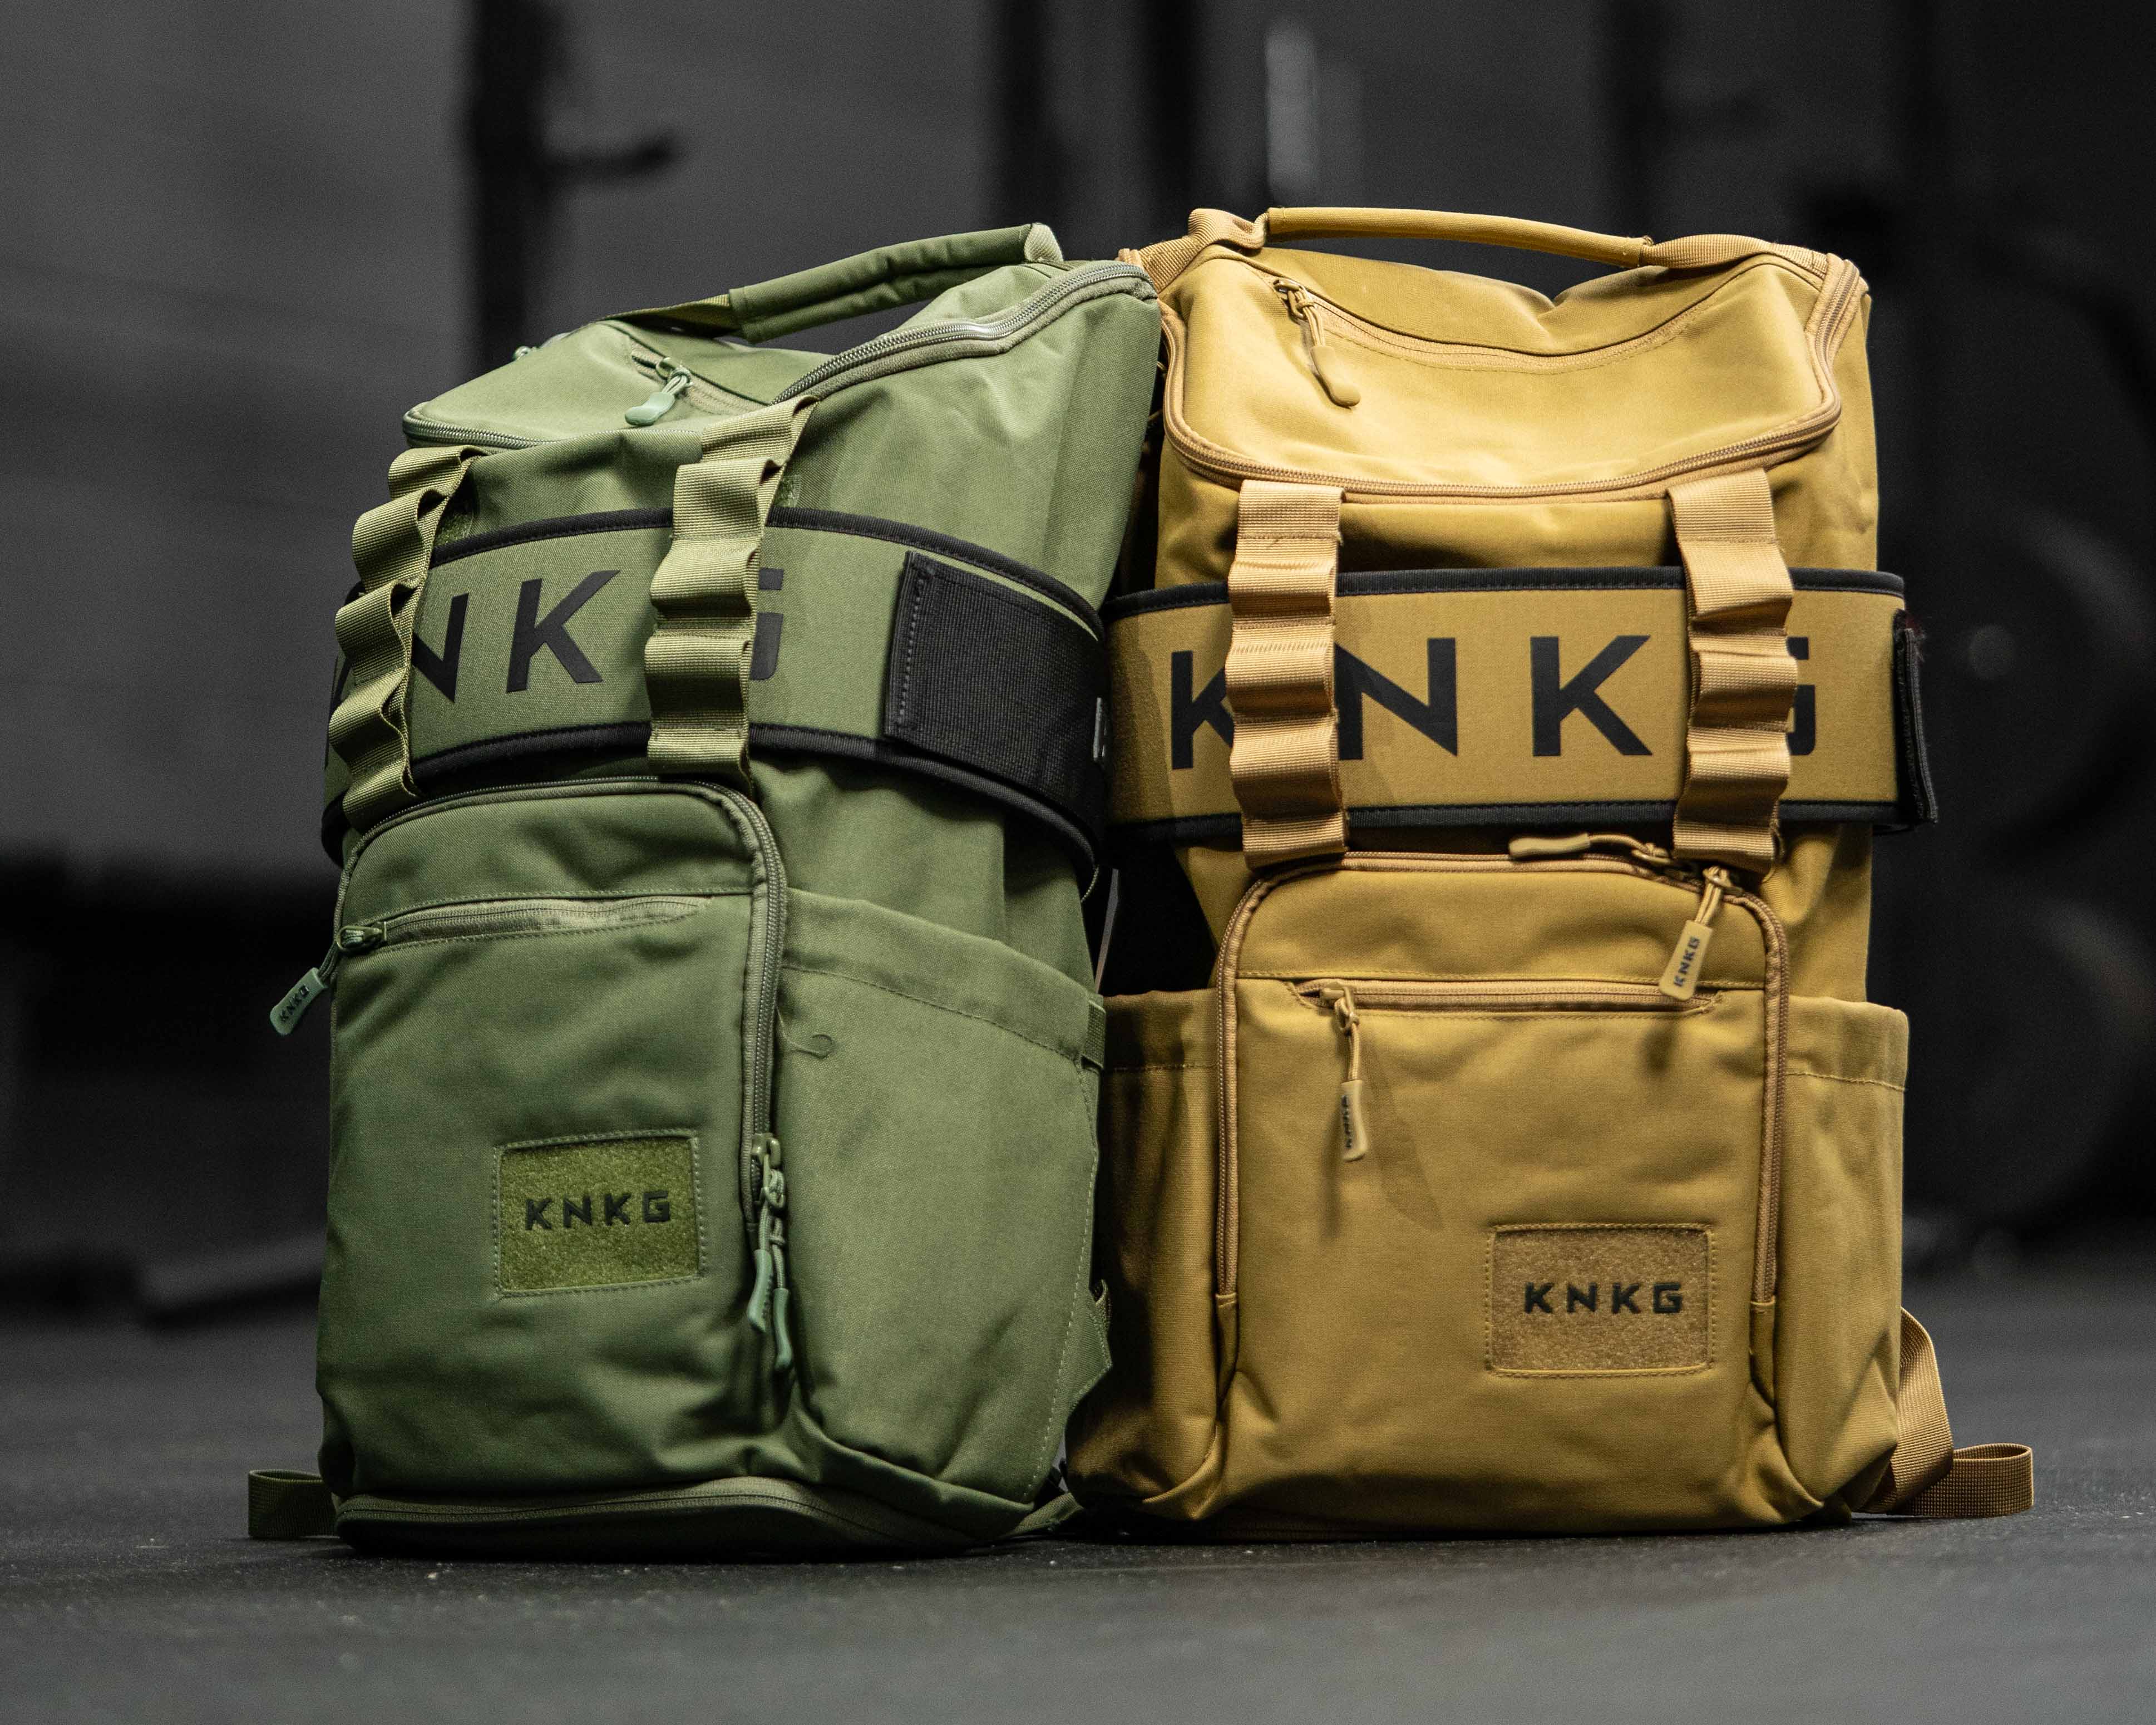 KNKG Core Backpack with weightlifting belt attached